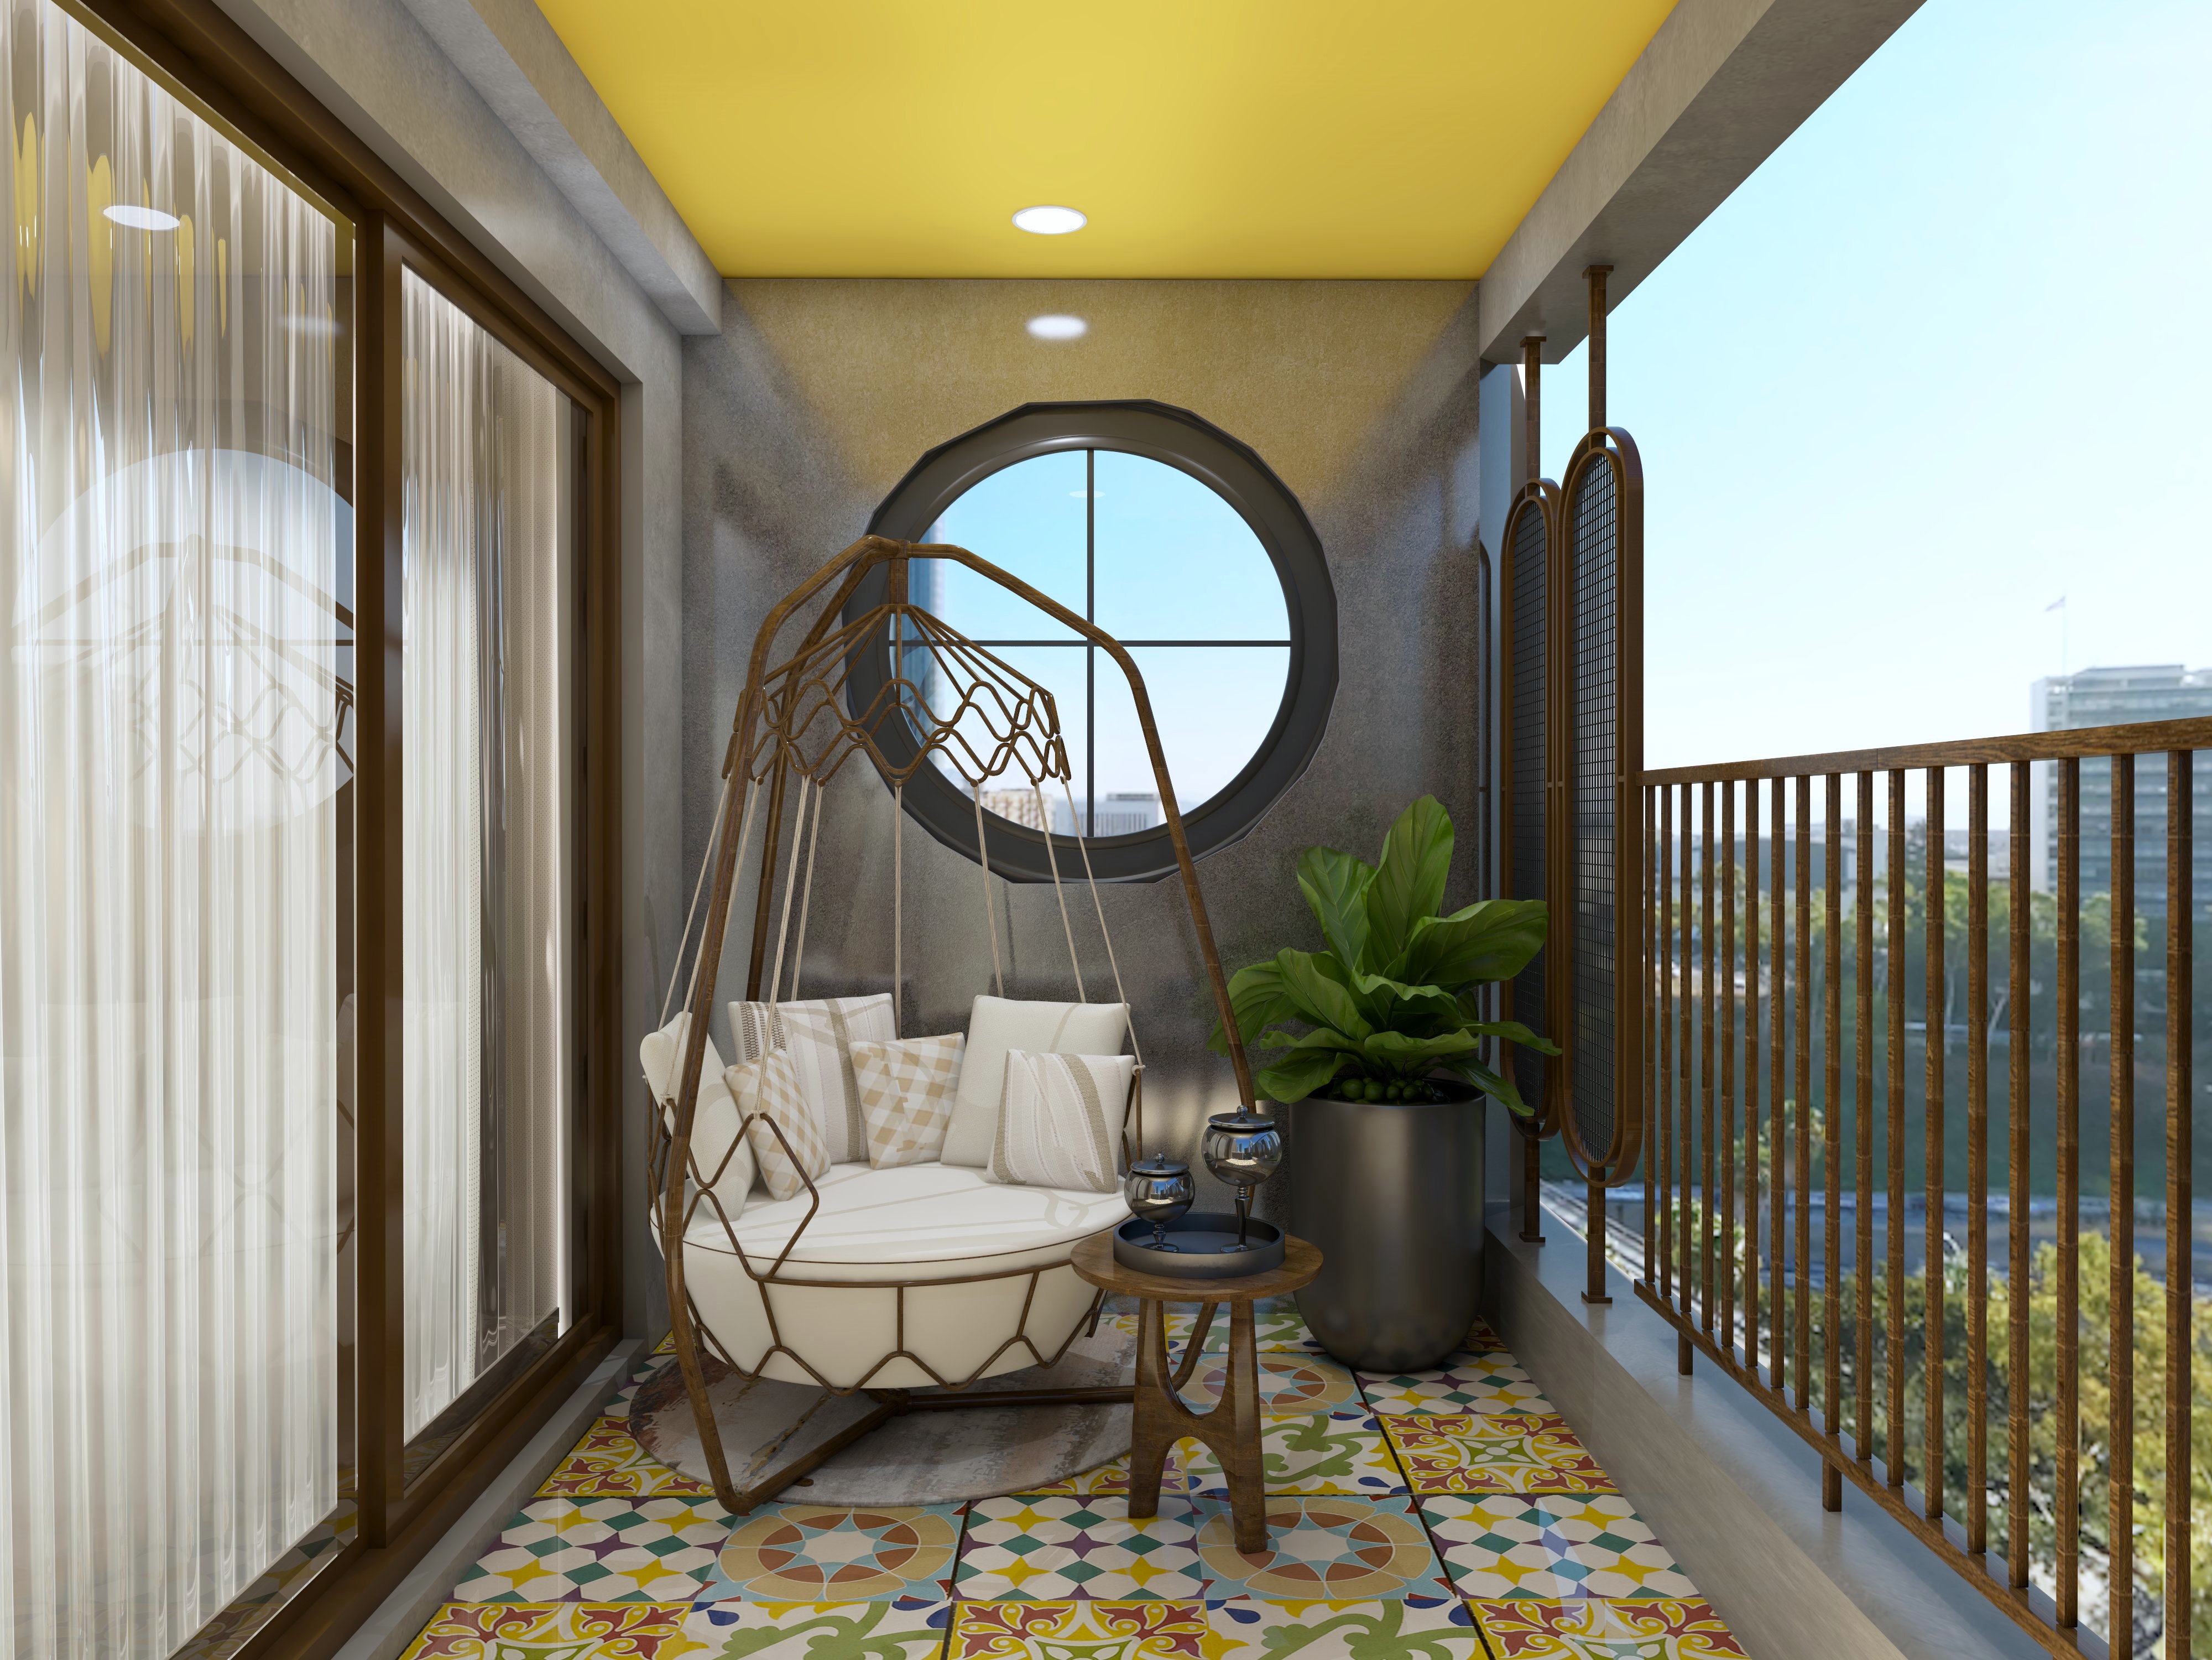 Balcony design with white swing and colorful floor tiles - Beautiful Homes